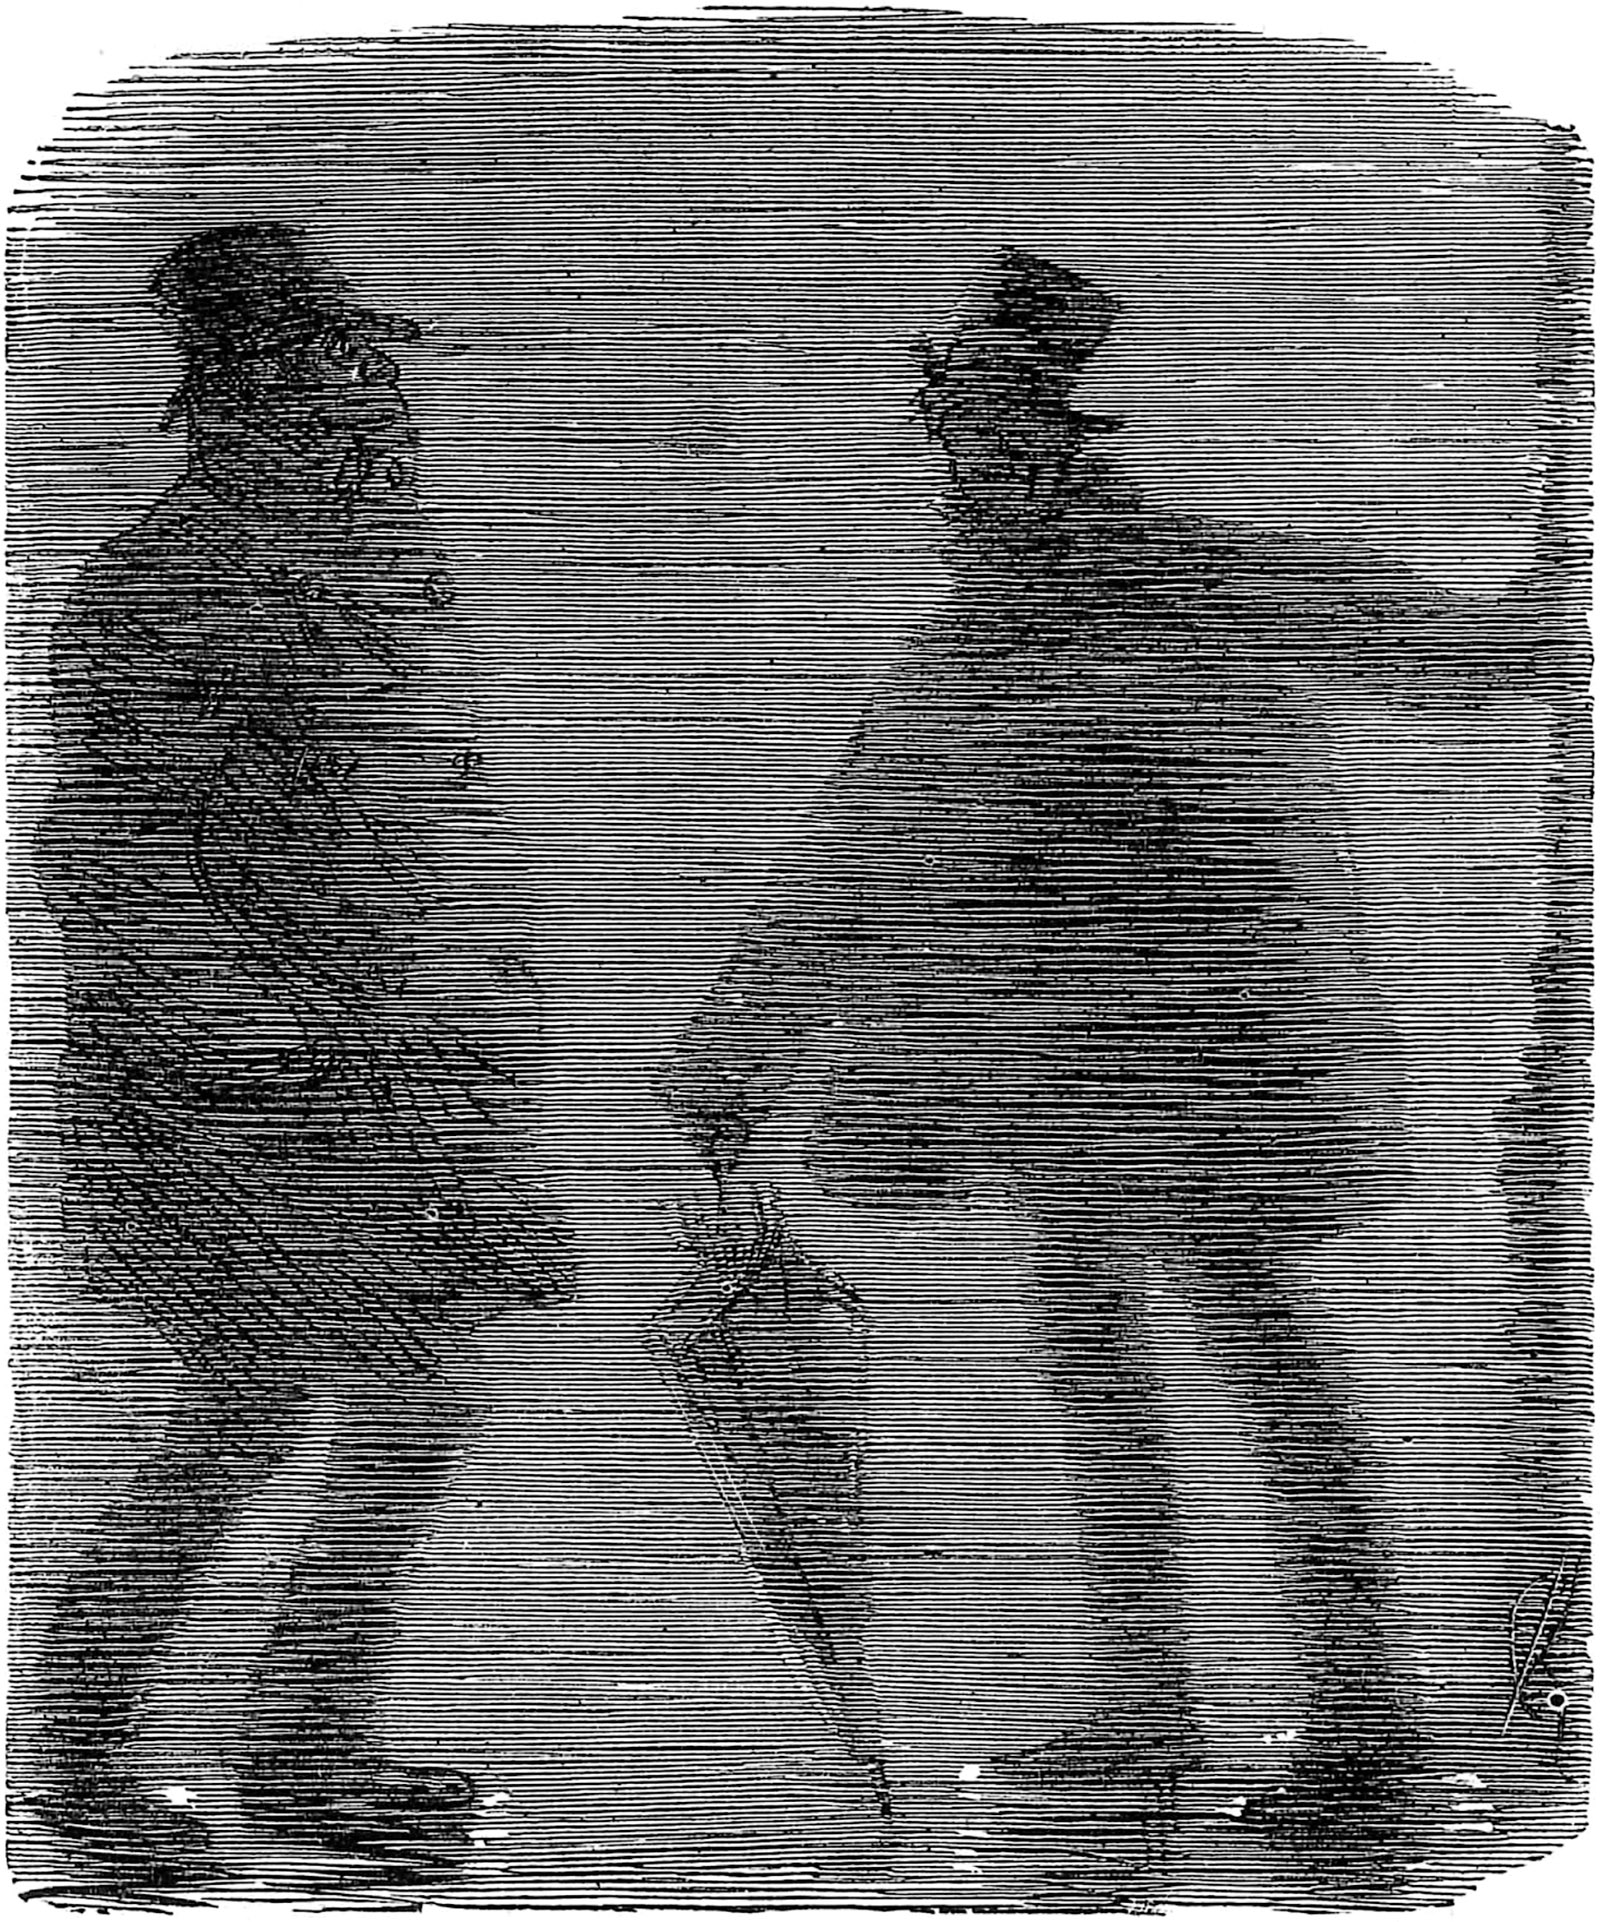 ‘Be-Fogged’; cartoon by Charles Keene from Punch, 1880. The caption says: ‘Polite Old Gentleman (in the Fog). “Pray, Sir, can you kindly tell me if I’m going right for London Bridge?” Shadowy Stranger. “Lum Bri’gsh? Goo’ Joke! ’Nother Man ’shame Shtate’s myshelf! I wan’ t’ fin’ Lum Bri’gsh, too! Ta’ my Arm—” [Old Gent hurries off!]’